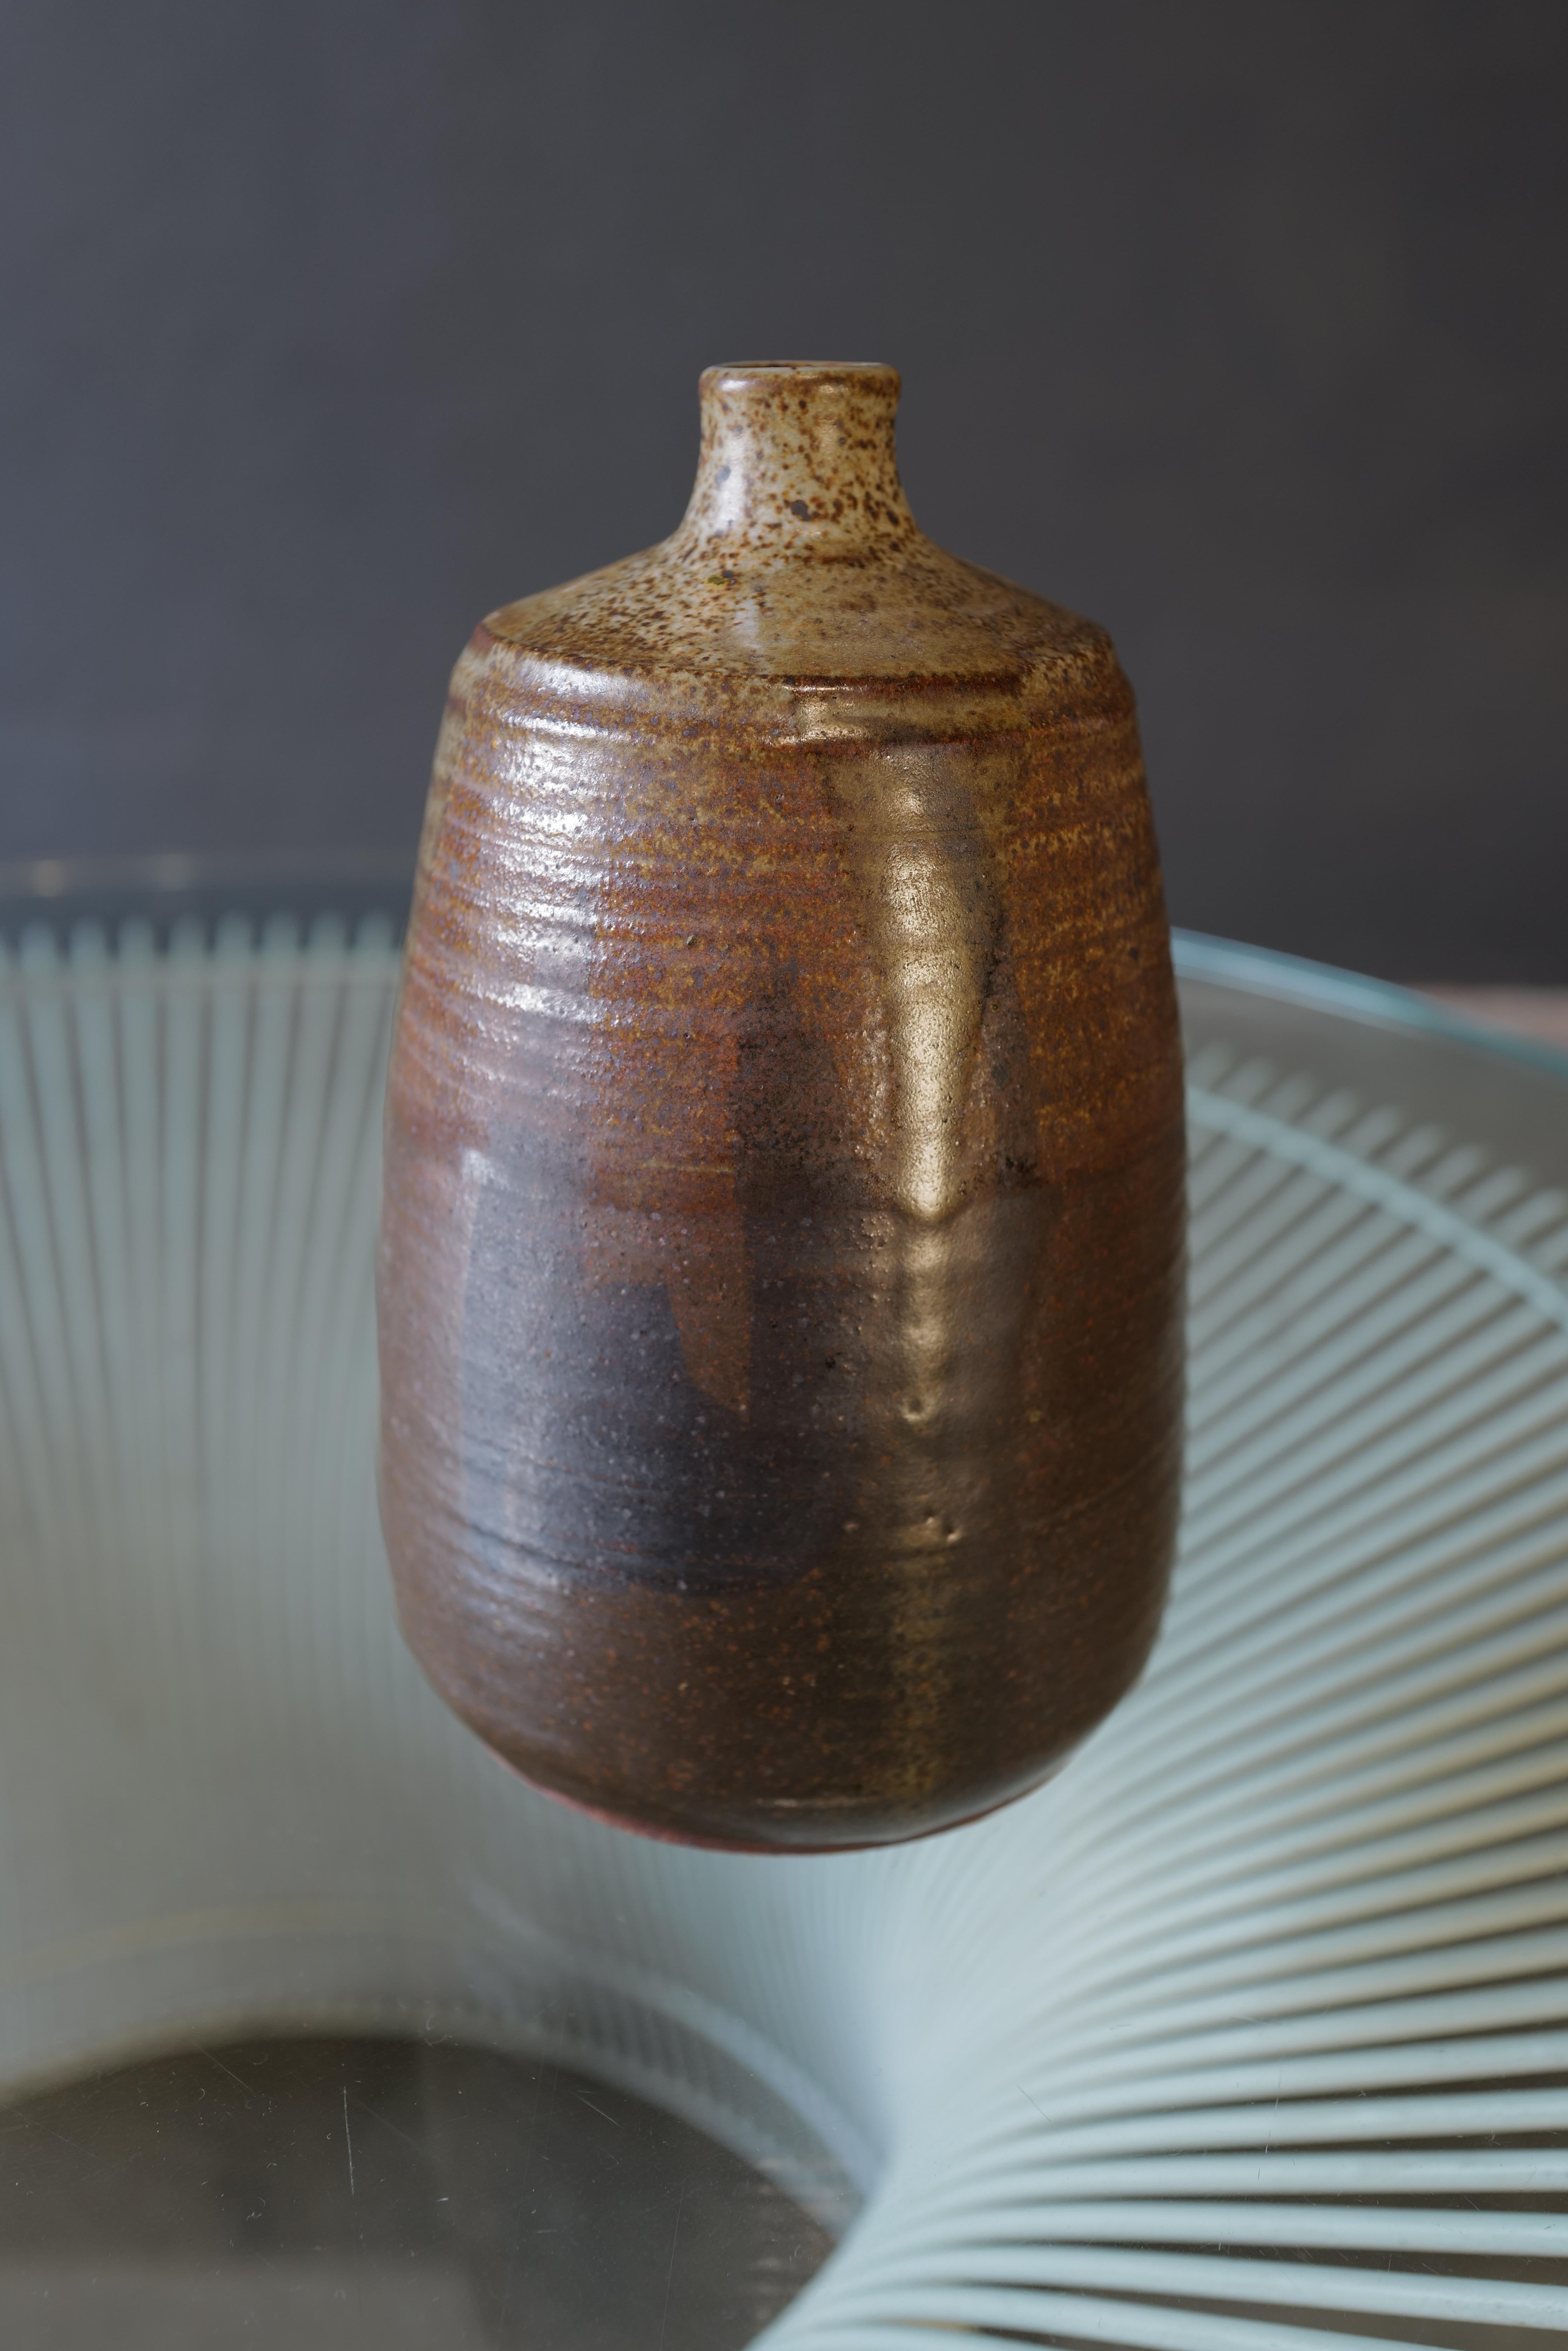 Experience the timeless beauty of Japanese craftsmanship with this exquisite ceramic pottery vase. Meticulously handcrafted by skilled artisans, this vase showcases the rich artistic traditions of Japan.
The vase features a sleek and elegant design,